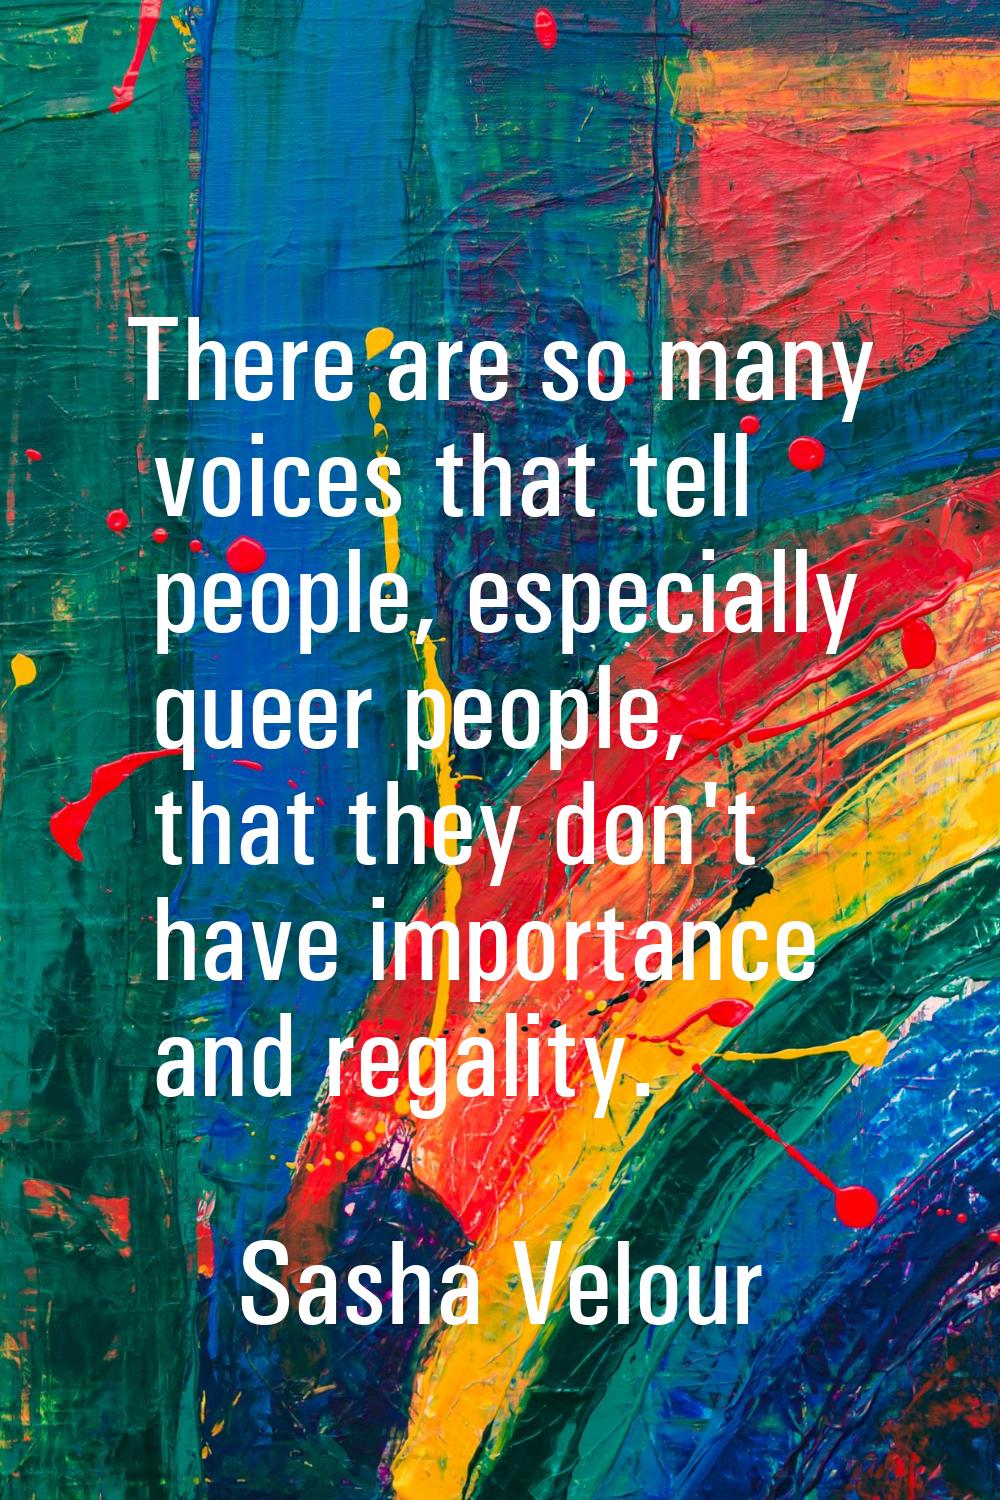 There are so many voices that tell people, especially queer people, that they don't have importance